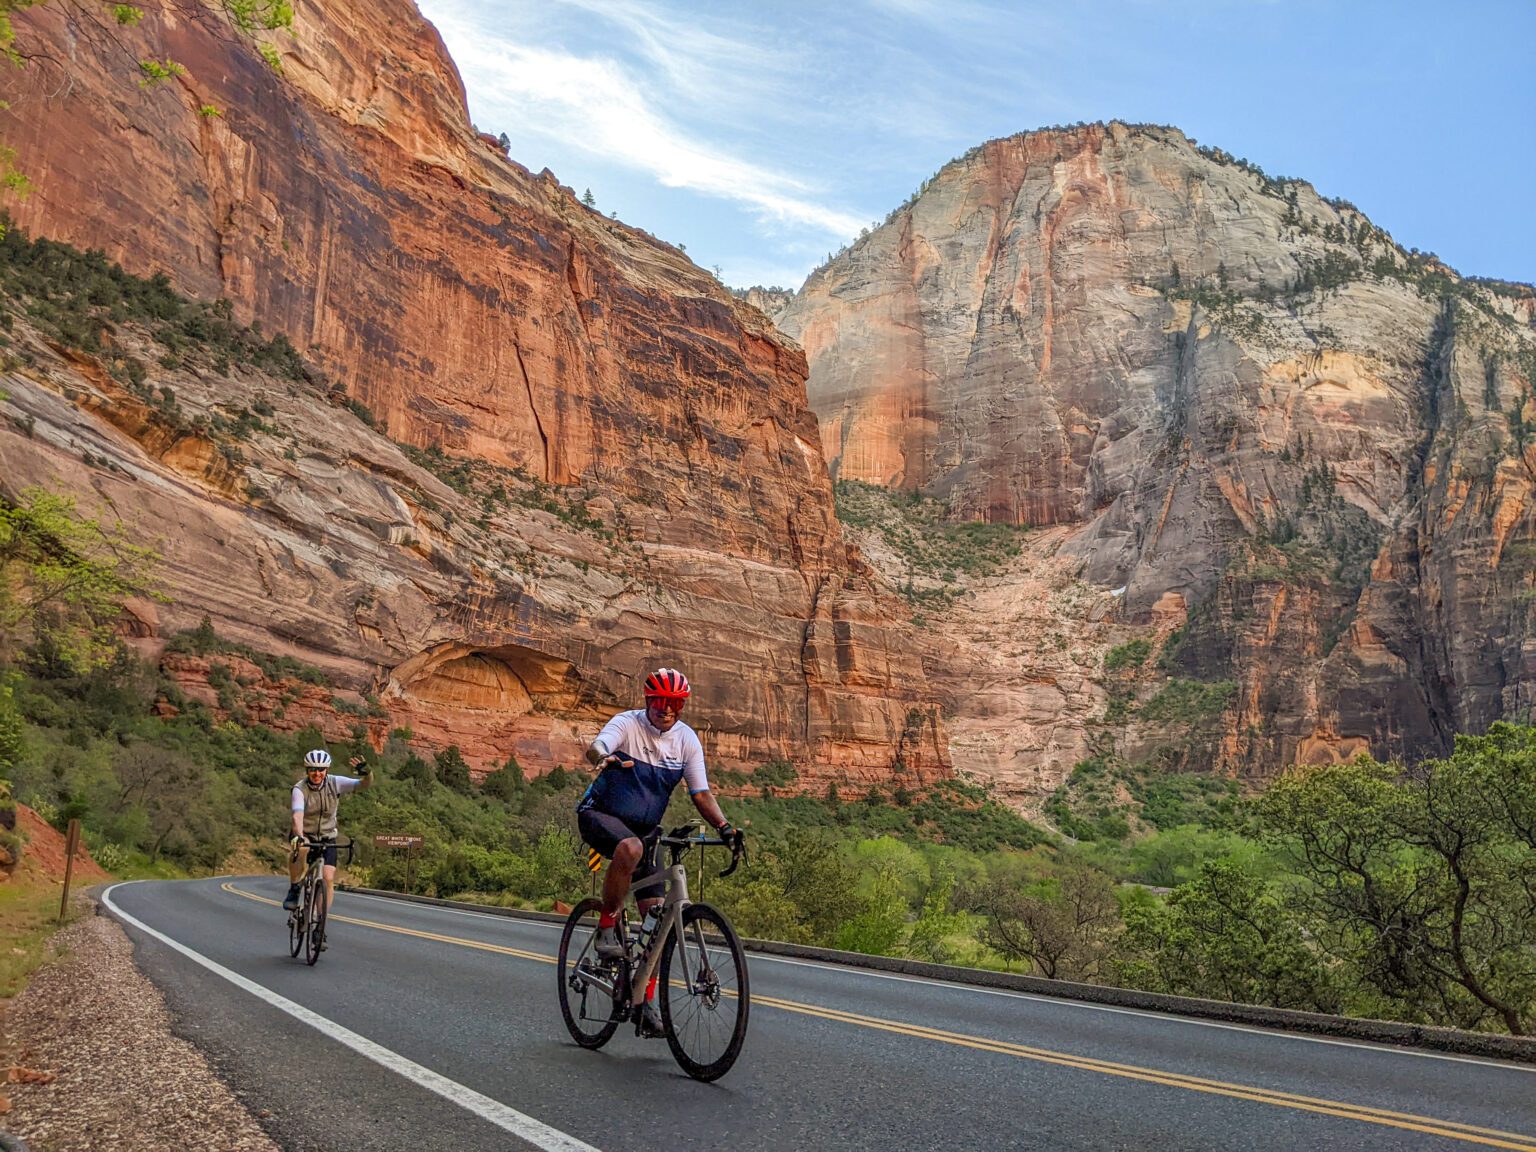 Two cyclists ride through rock strata in the Utah canyonlands